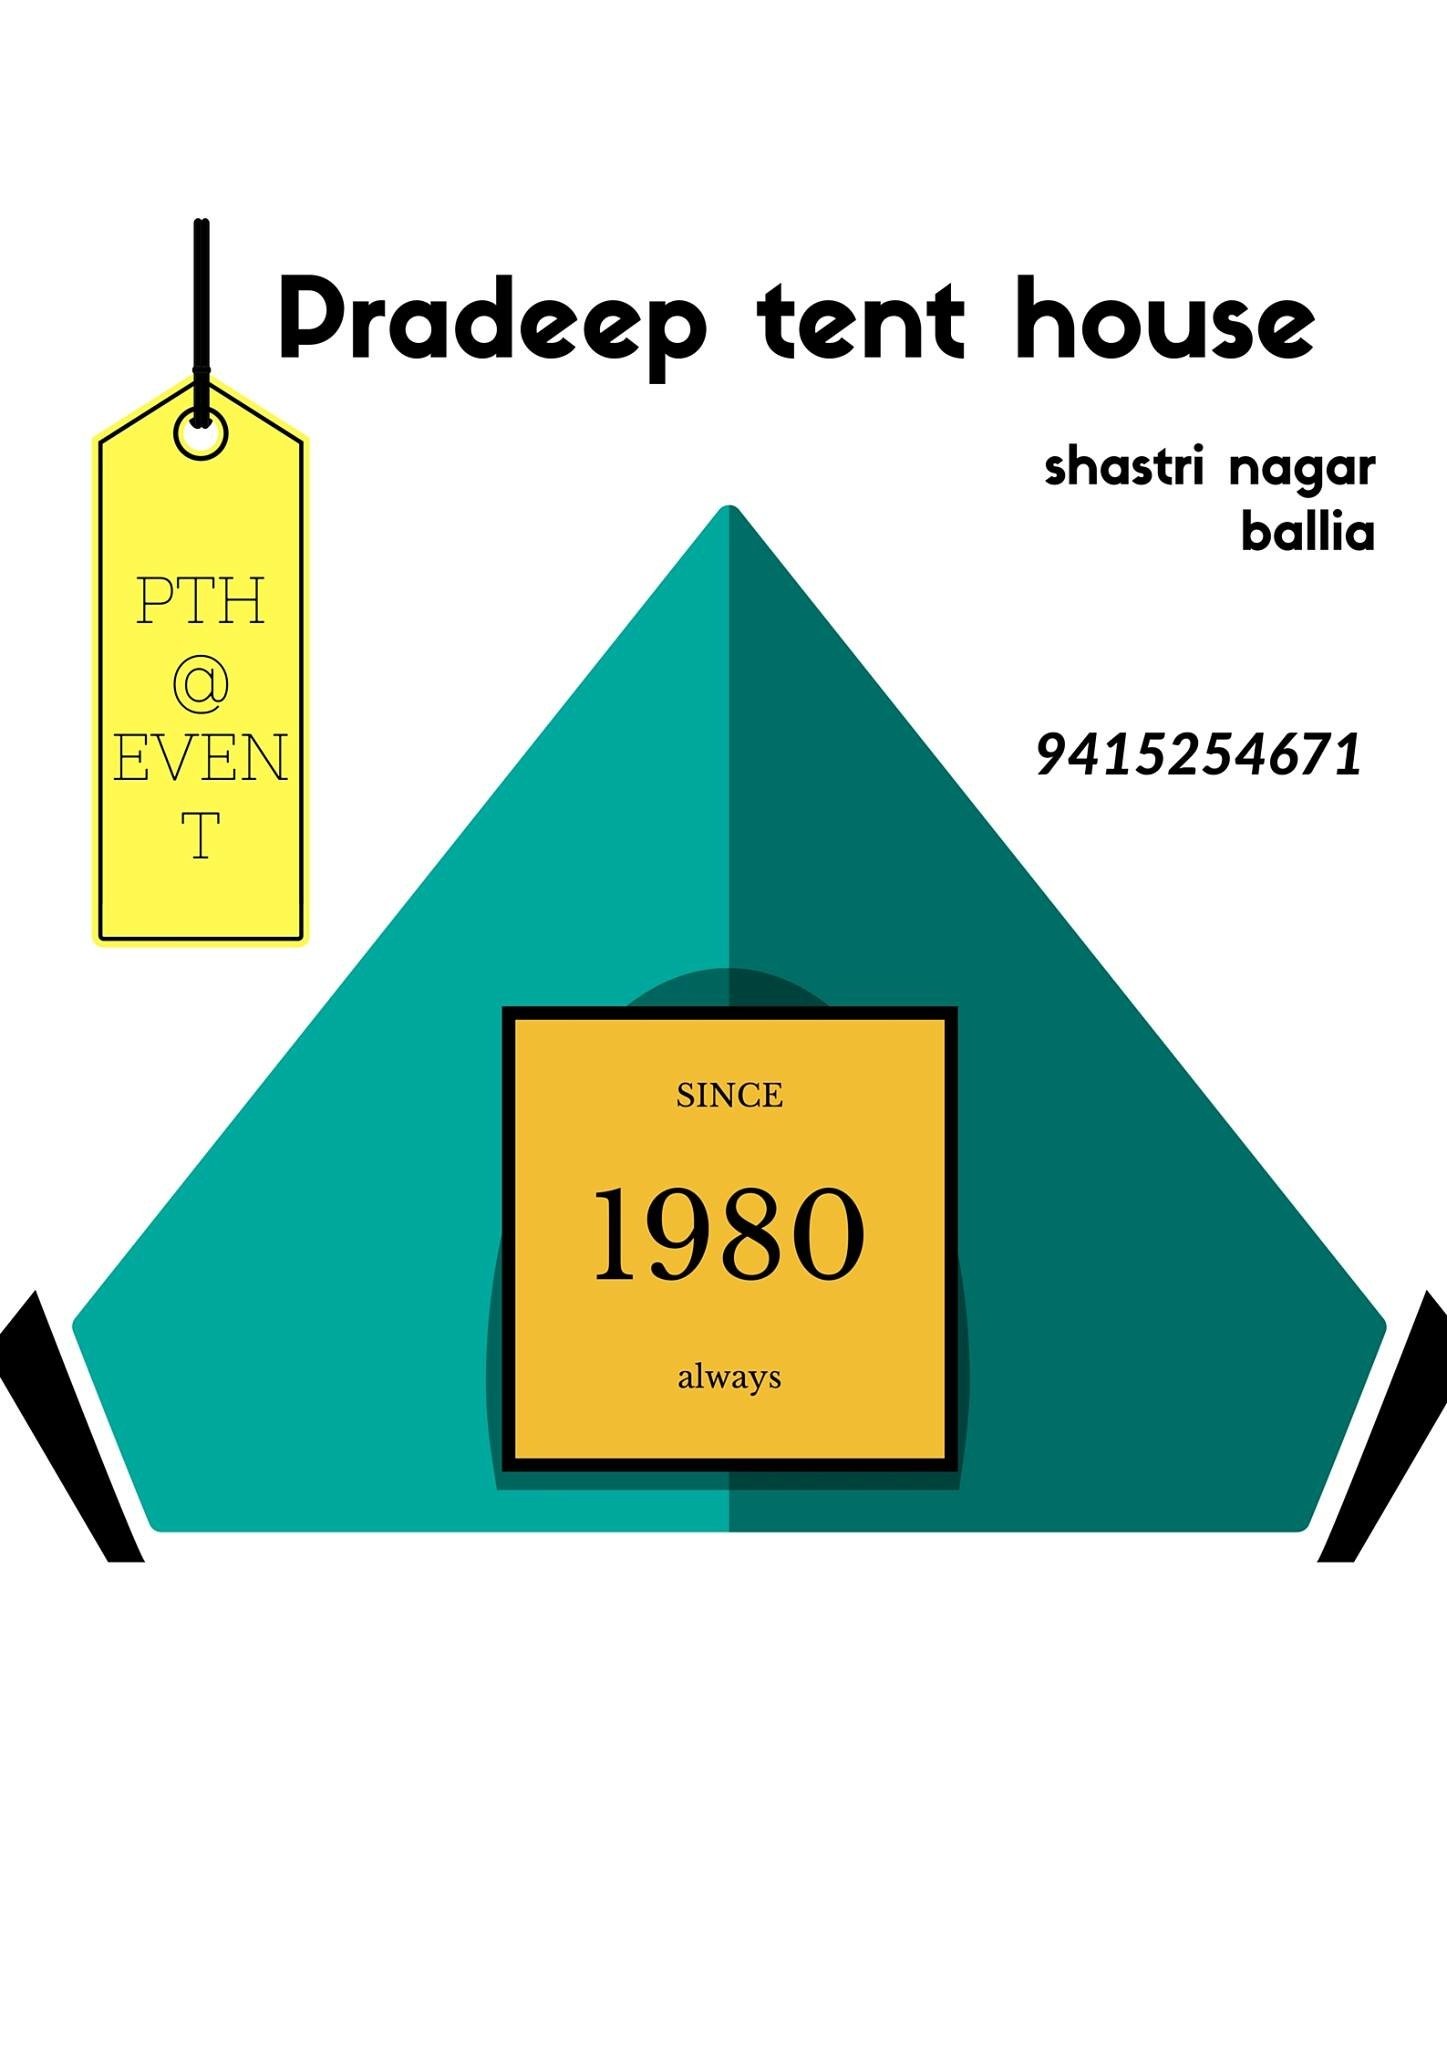 Pradeep tent house we understand your aesthetic needs and make your wedding ceremony a resplendent one with our ace floral decorations and other events